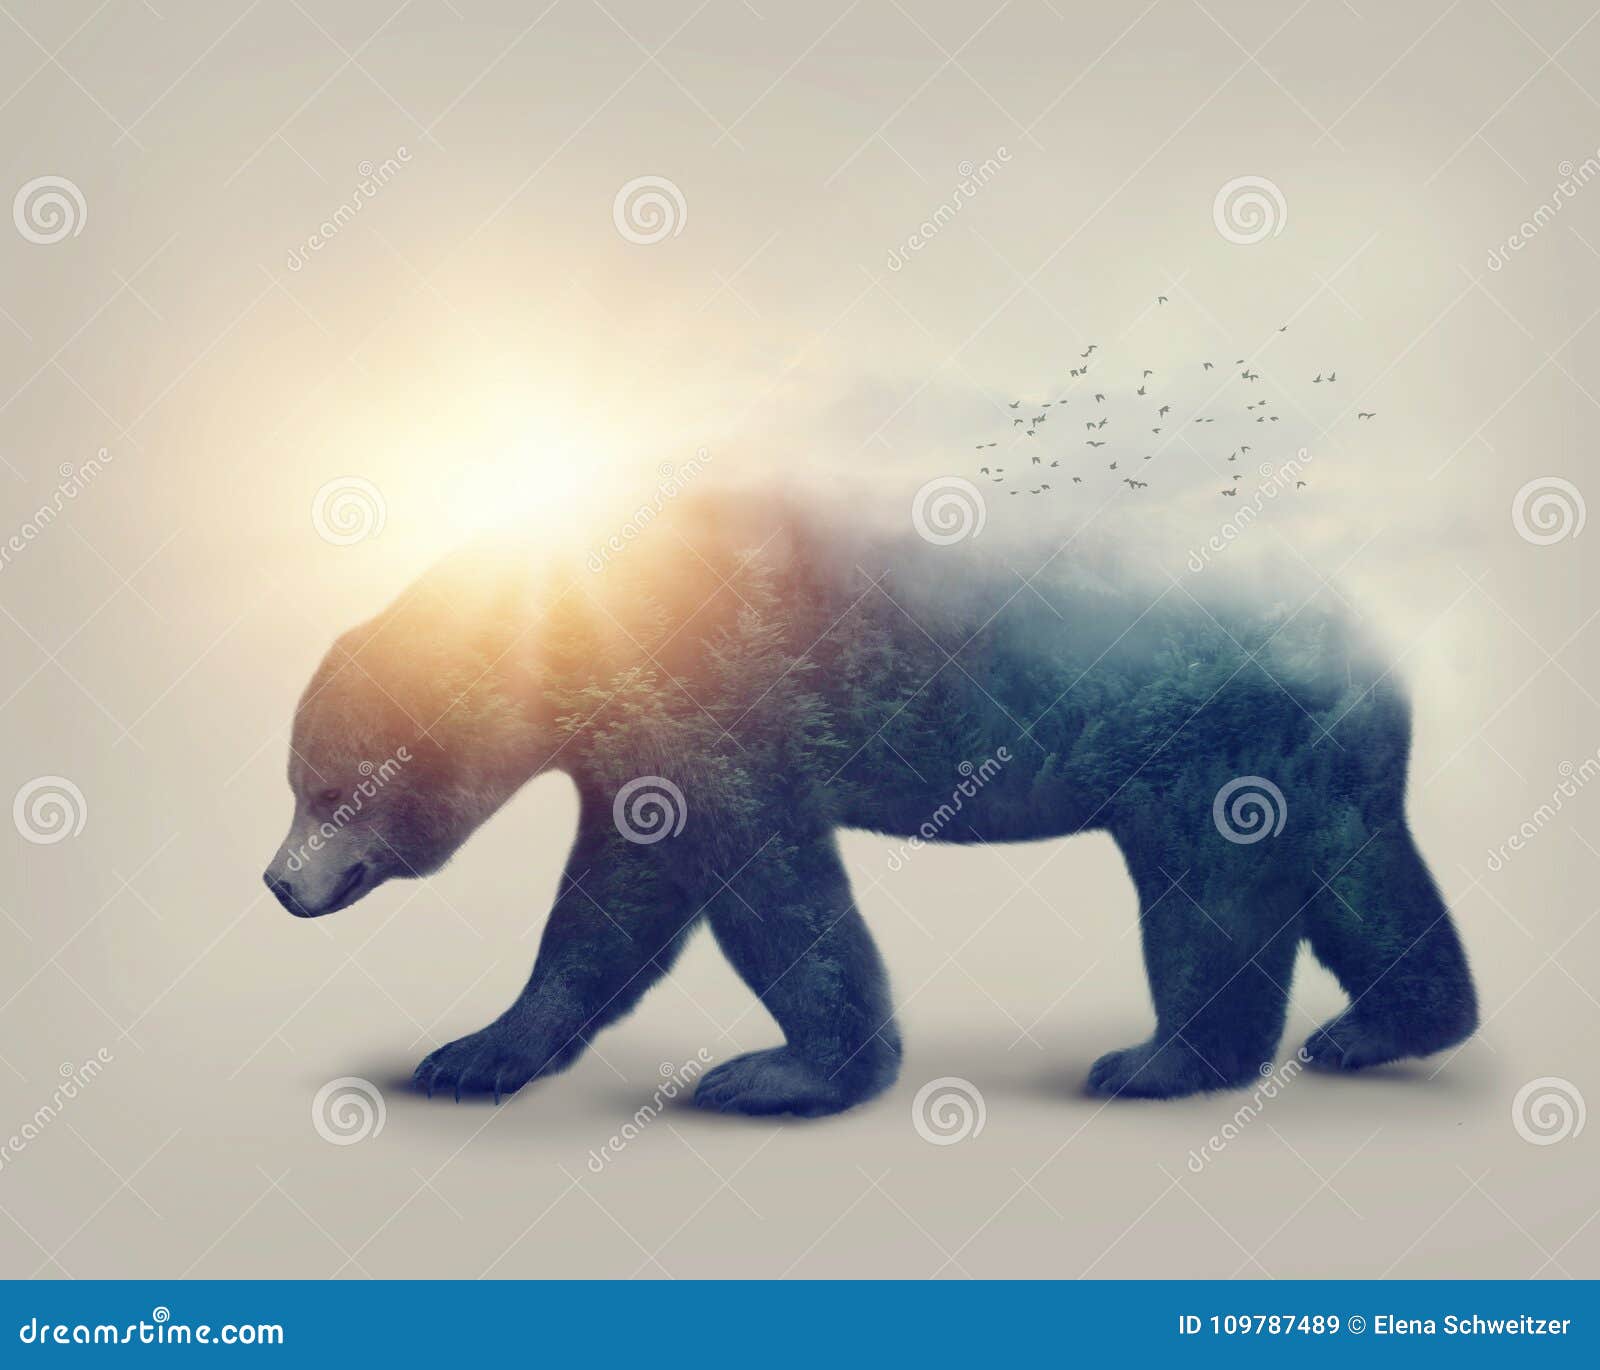 double exposure with a bear